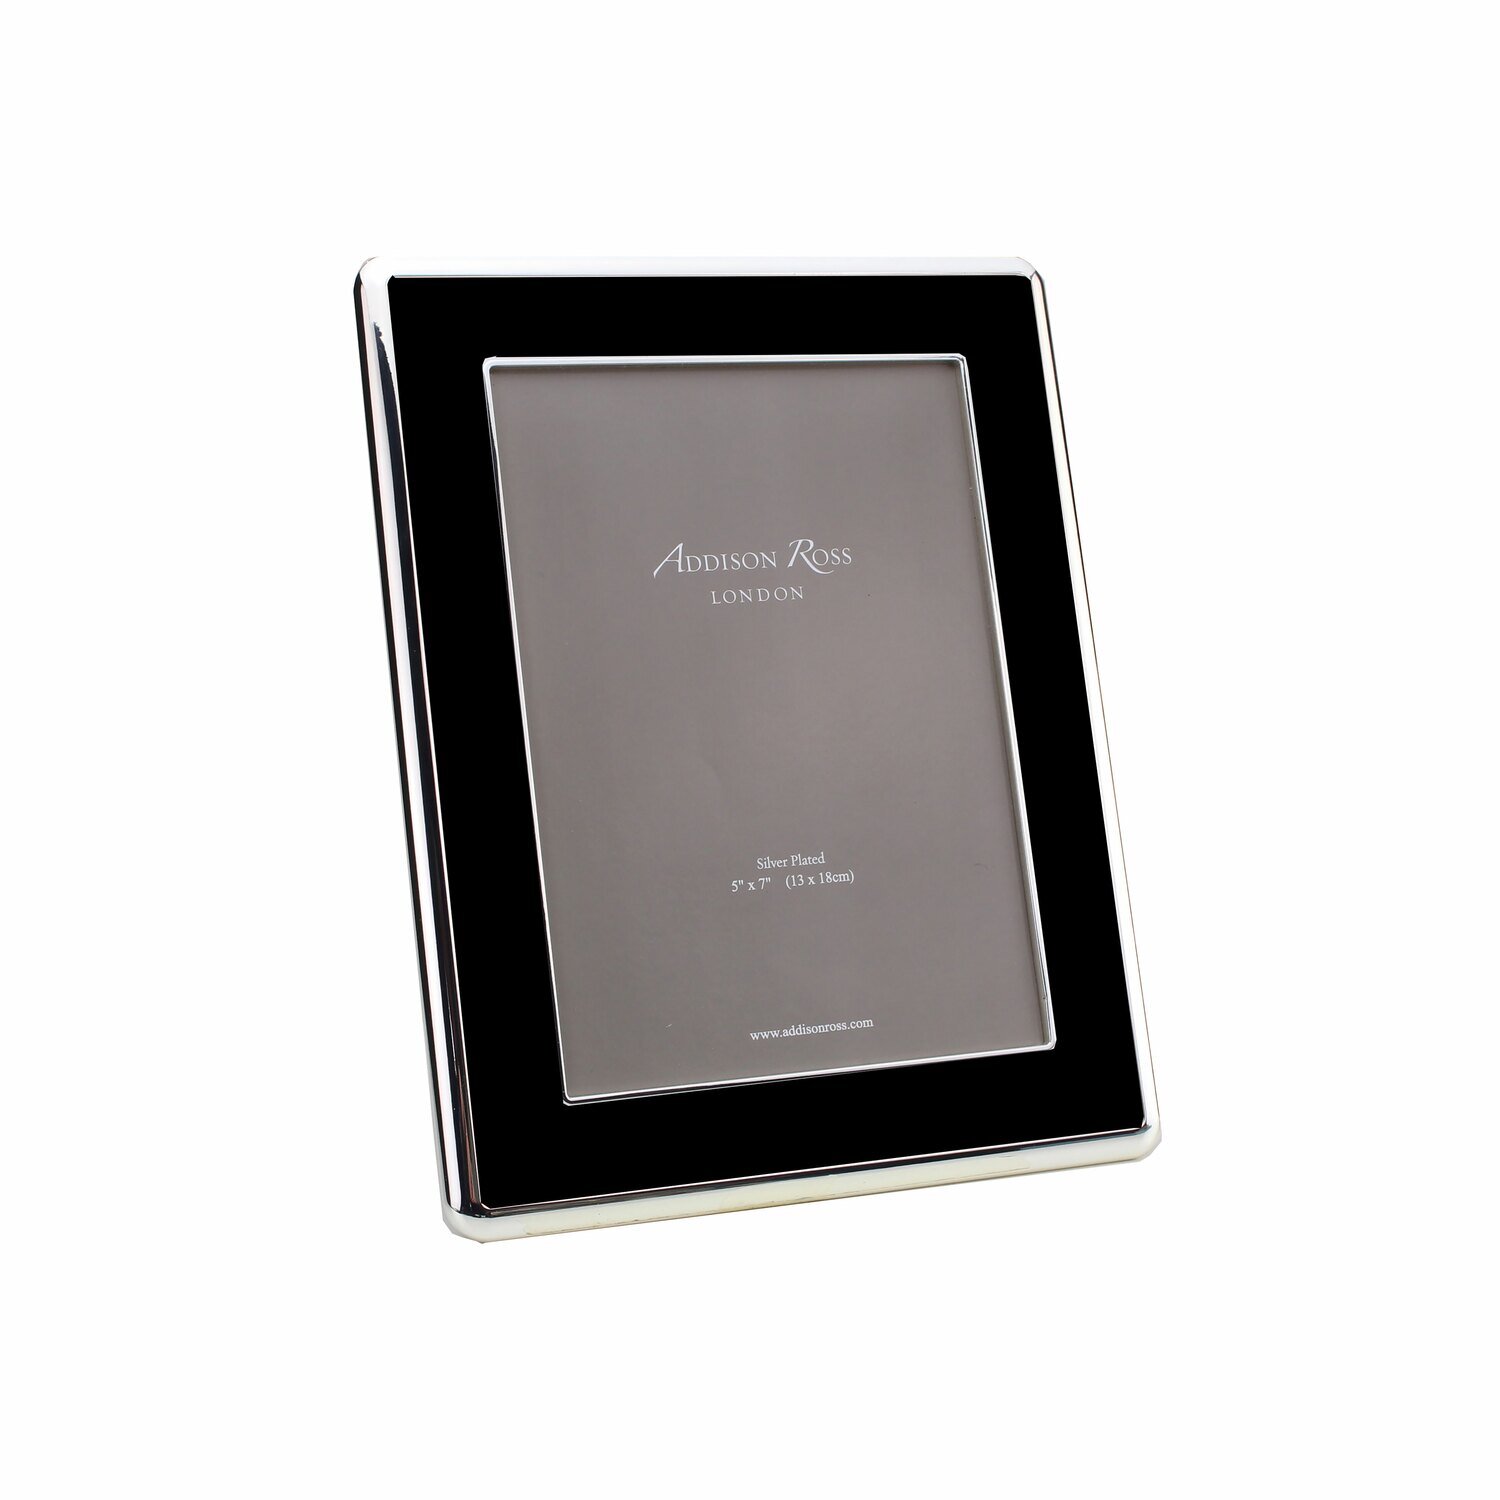 Addison Ross Wide Curved Enamel Picture Frame Black & Silver 5 x 7 Inch Silver-plated FR6111